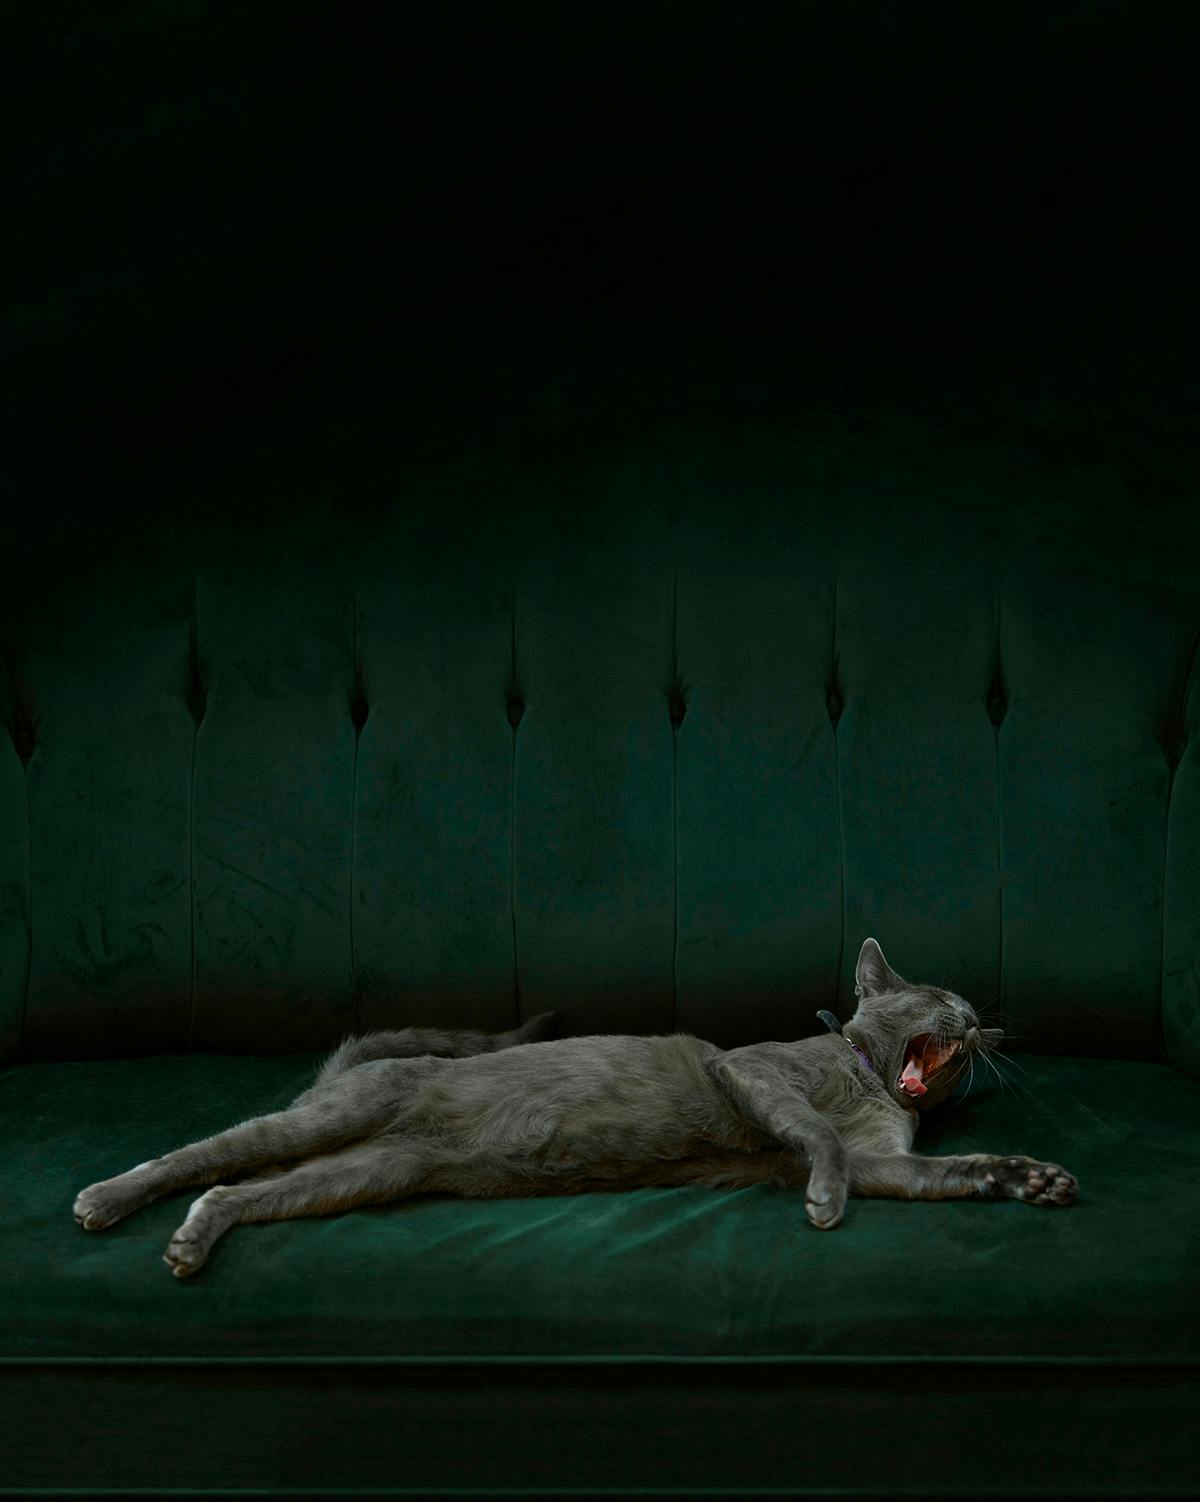 Photograph of a gray cat yawning on green seating by Hugh Fox